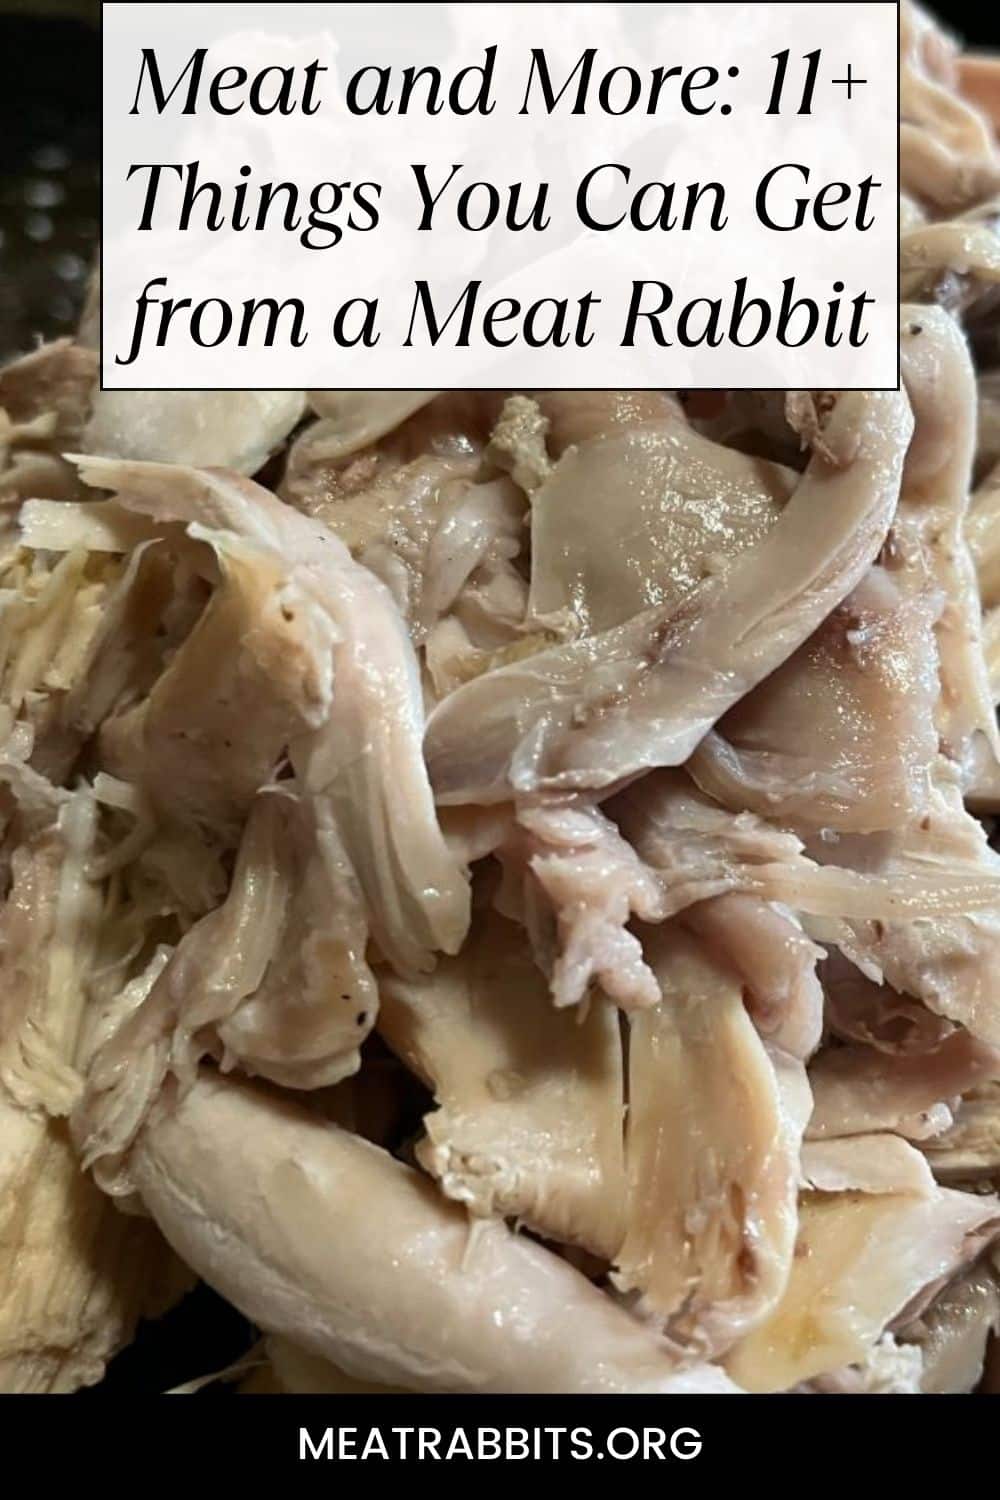 Meat and More: 11+ Things You Can Get from a Meat Rabbit pinterest image.